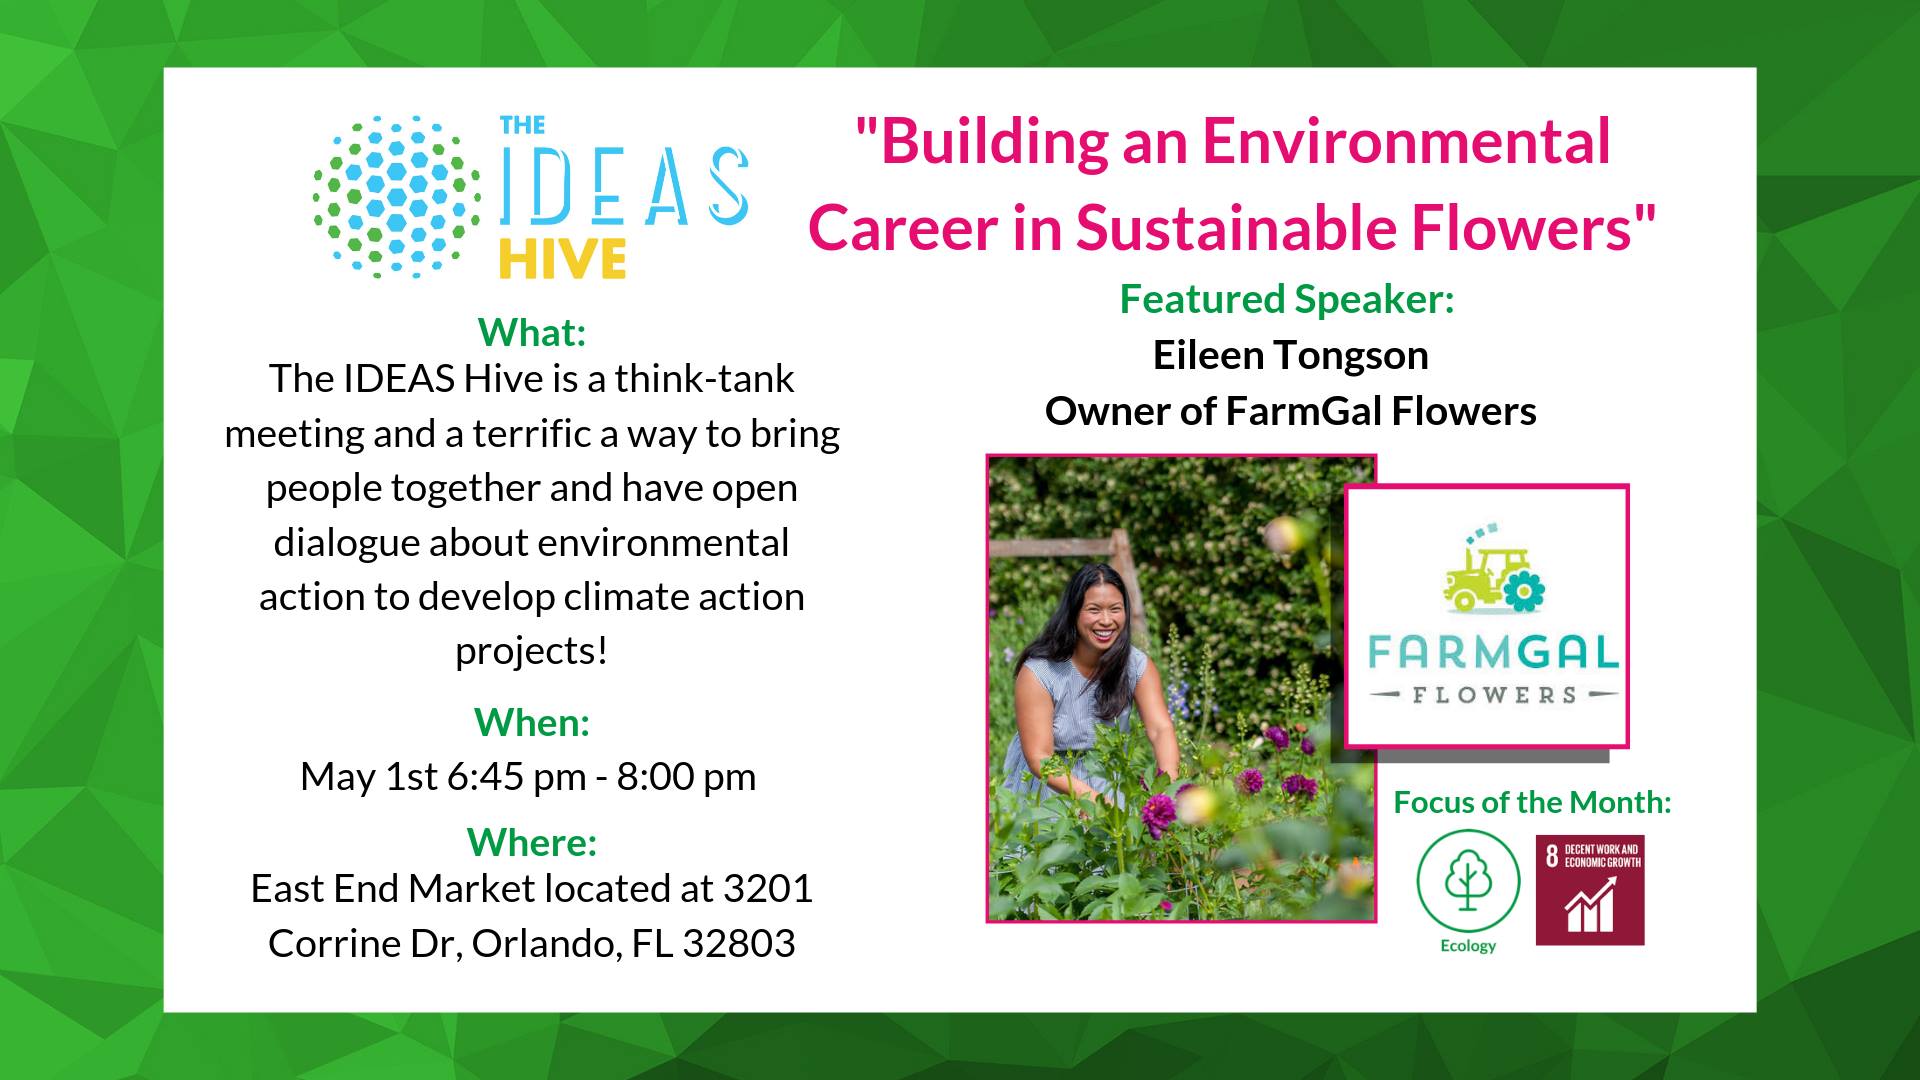 THE IDEAS HIVE: “BUILDING AN ECO-CAREER IN SUSTAINABLE FLOWERS”